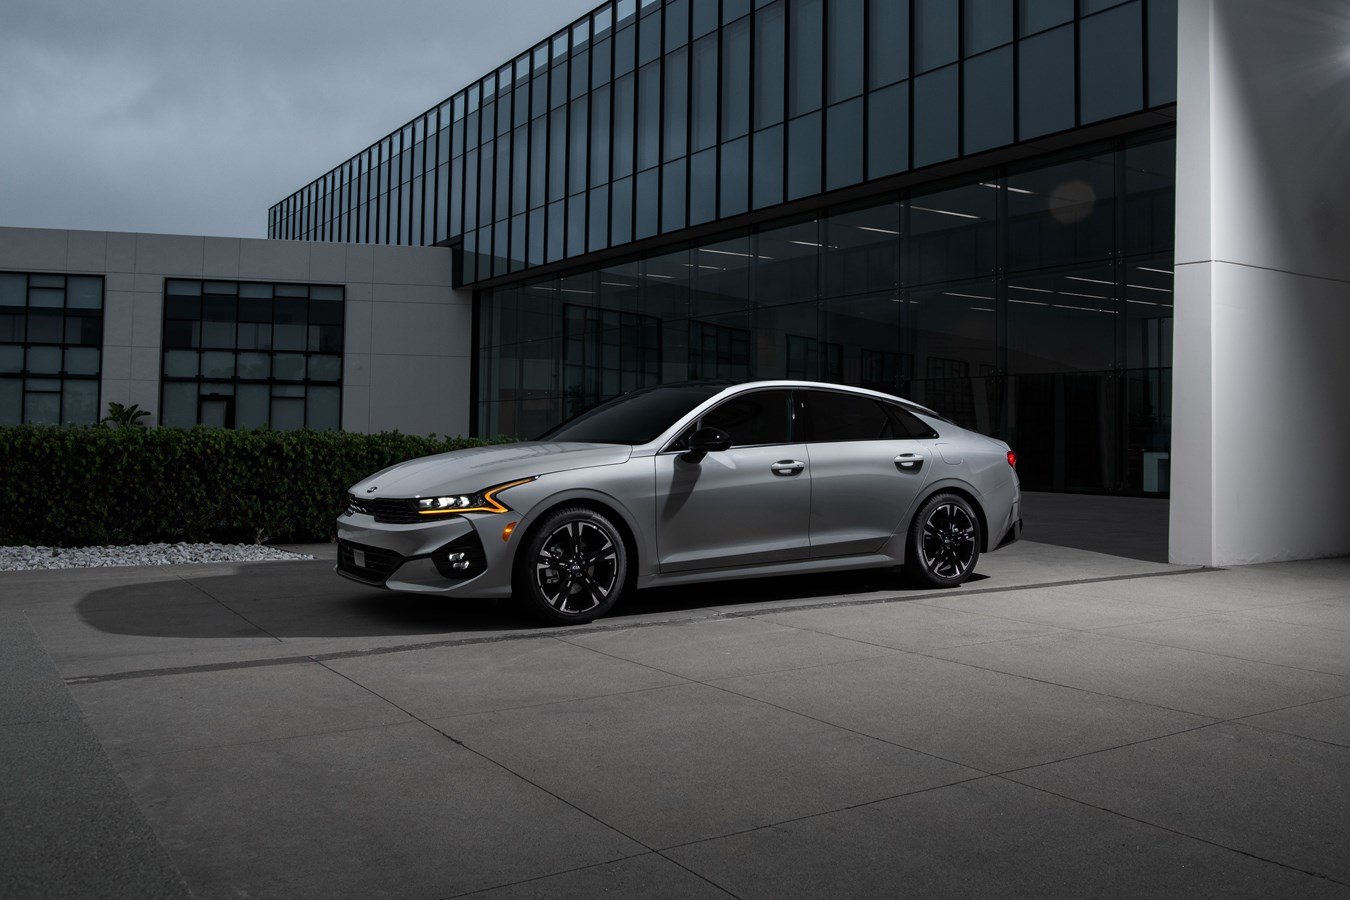 This Is The All-New 2021 Kia K5, A High-Tech New Midsize Car